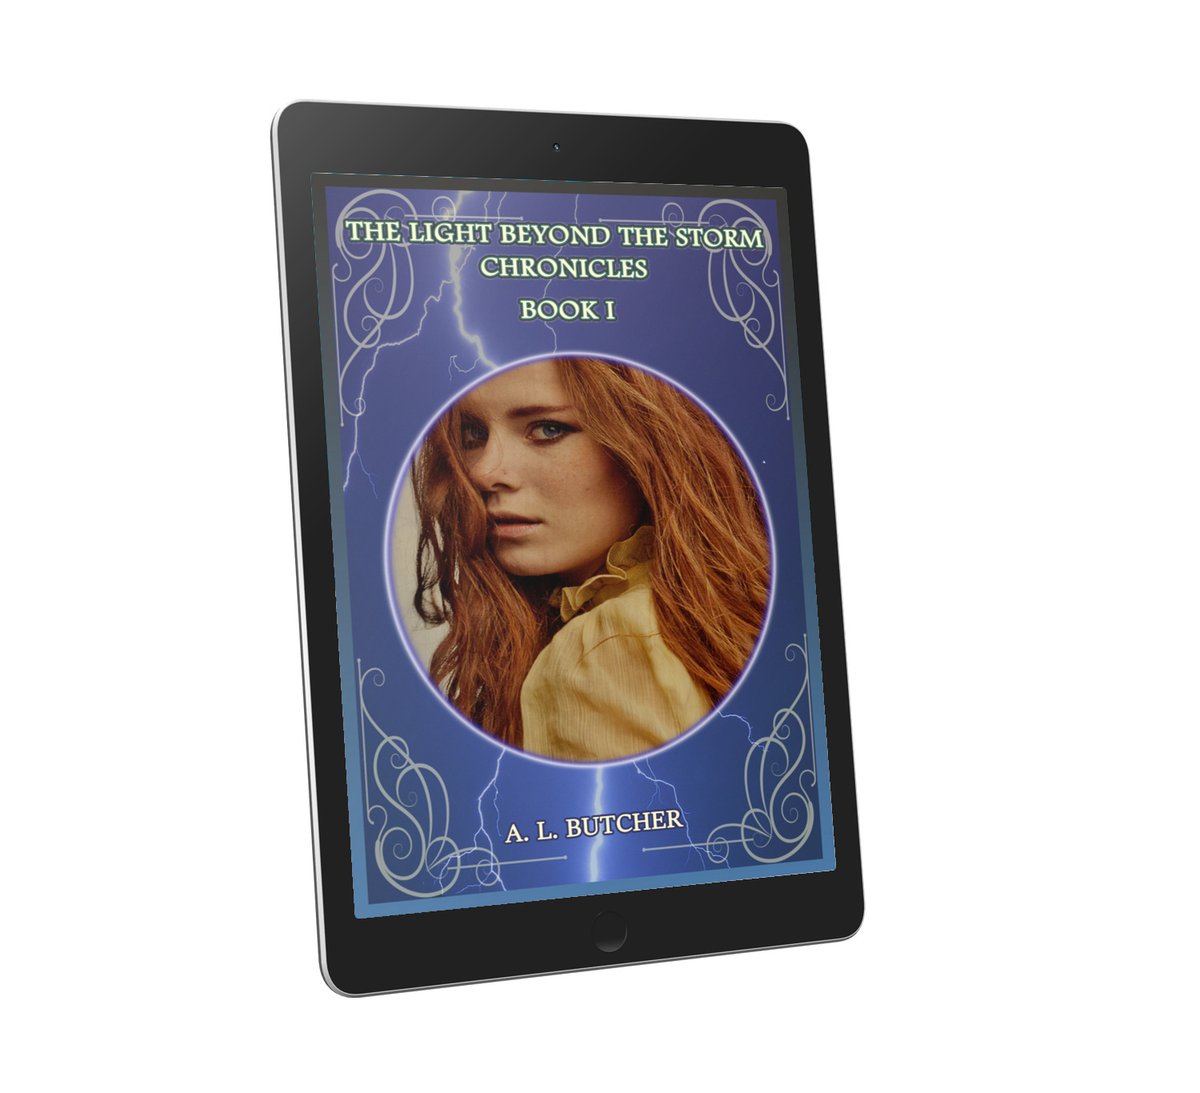 In a dark world of forbidden magic an elven sorceress runs for her life - dare you follow? A dark #fantasy adventure filled with magical mayhem, sizzling sorcery, romance and revenge.   books2read.com/Lightbeyondsto… Adult rated #ebook #largeprint #print #Audiobook #IARTG #IARTG #IAN1